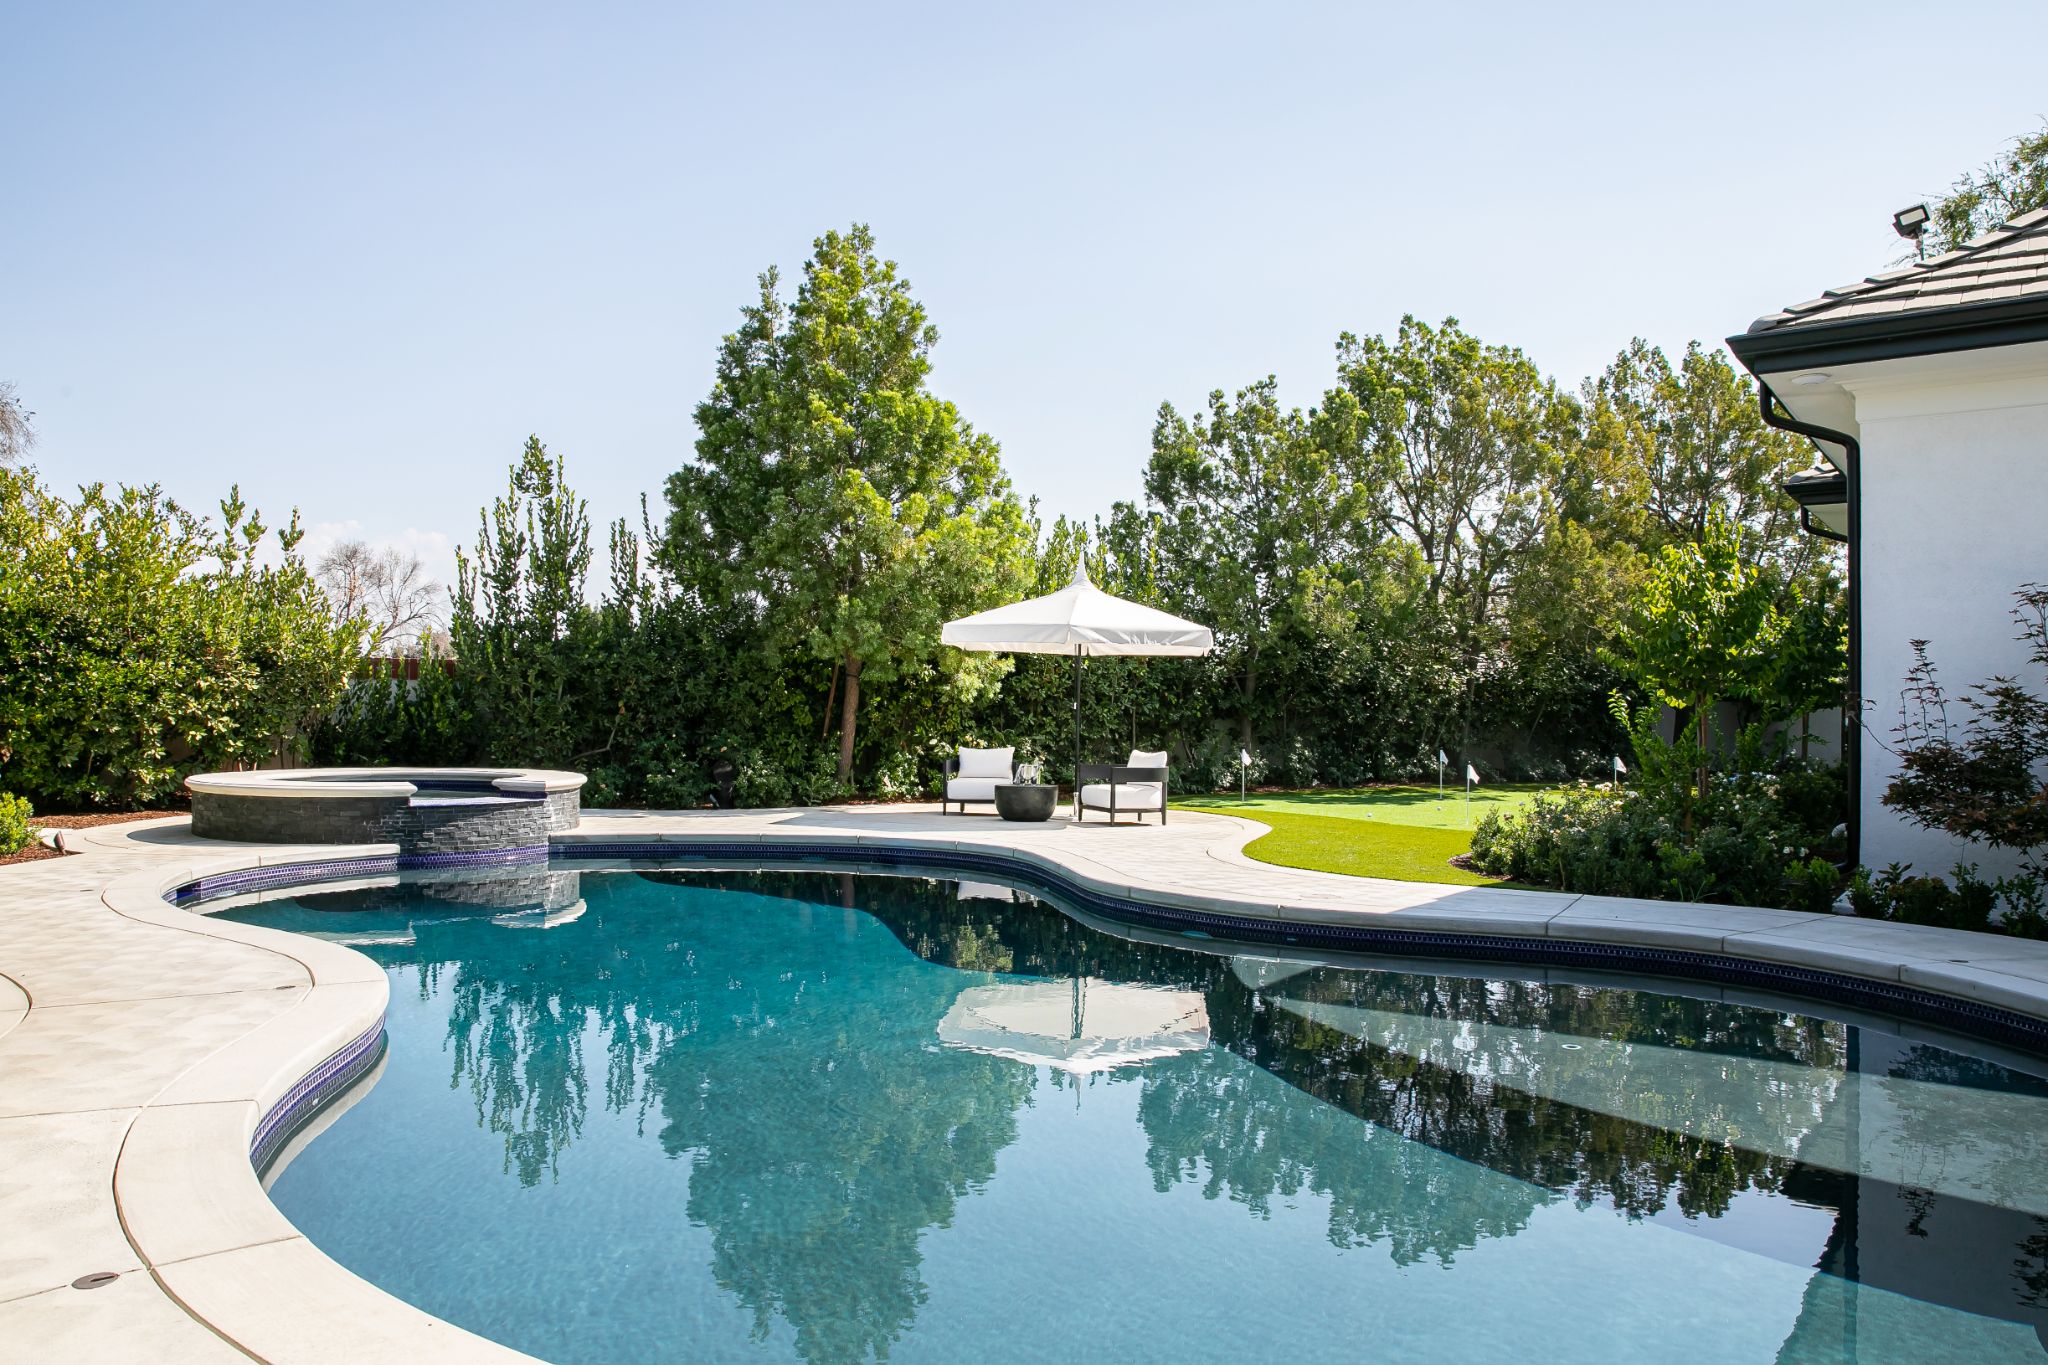 Pool Landscaping Ideas: The Best Materials To Use In And Around A Backyard  Pool | Homes & Gardens |